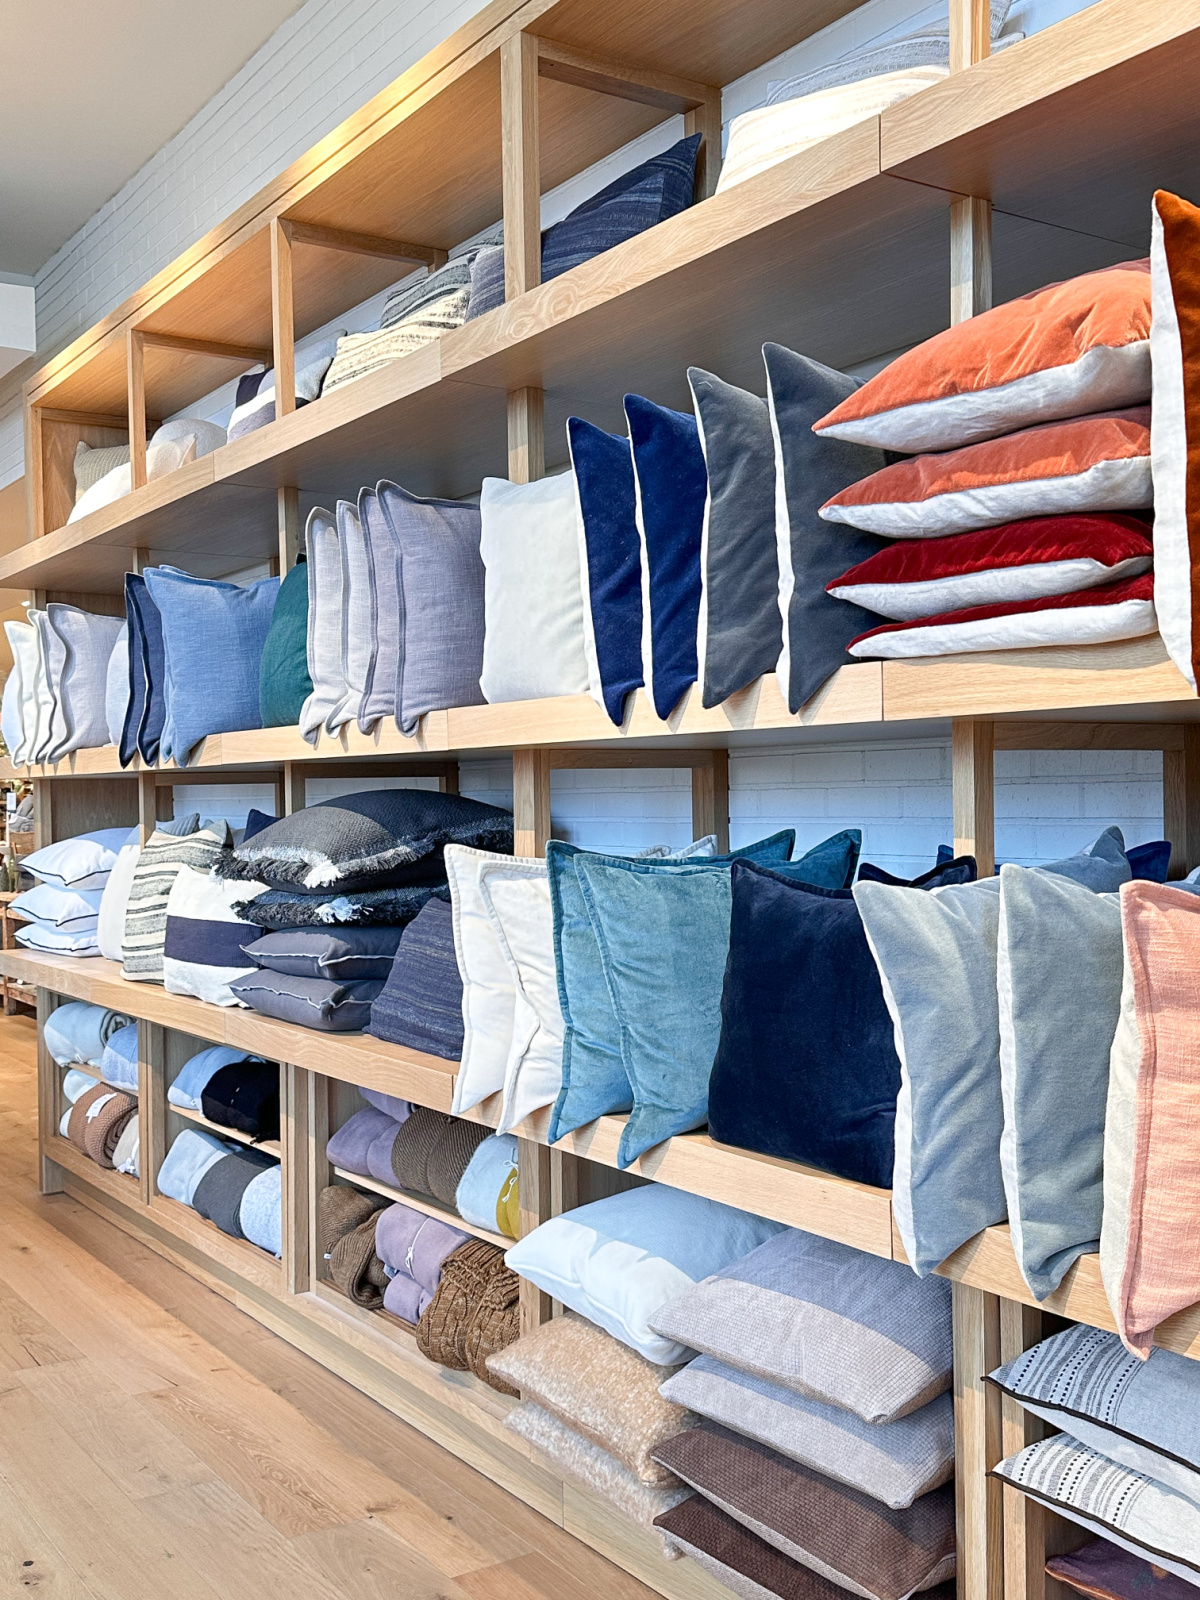 Shelves stocked with colorful pillows at Crate & Barrel.